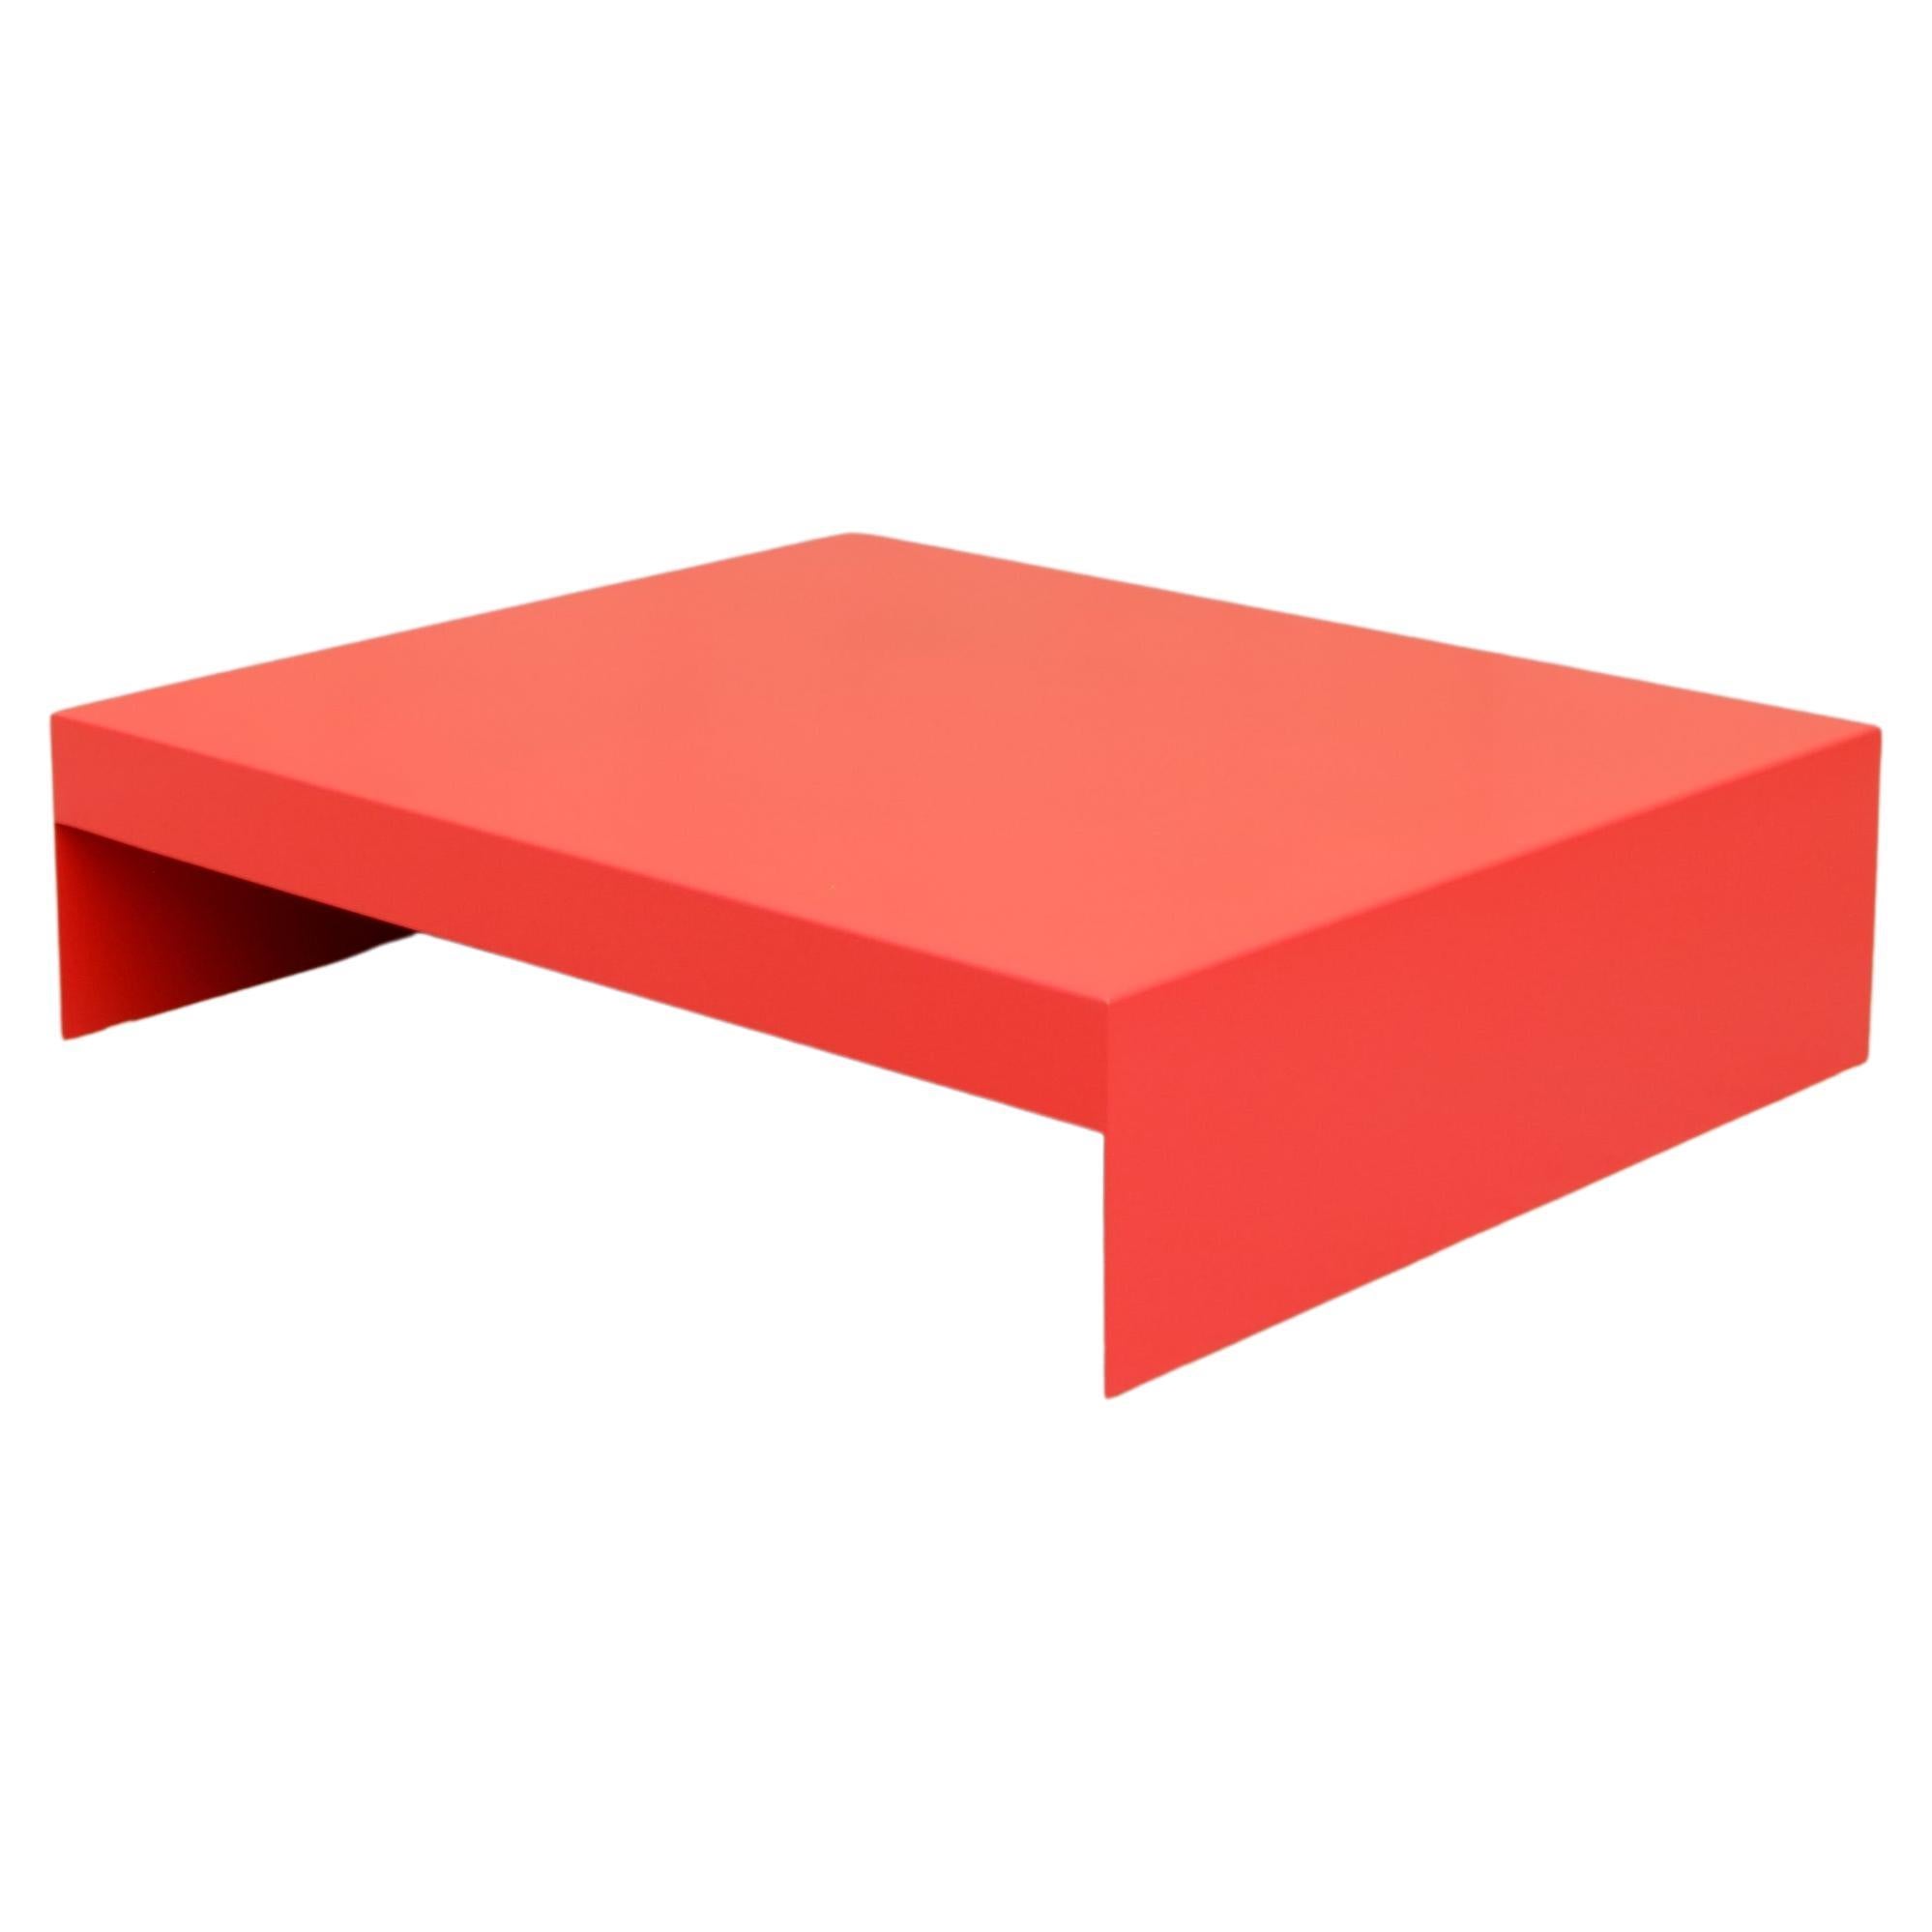 Large Rectangular Red Single Form Coffee Table in Aluminium - Customisable For Sale